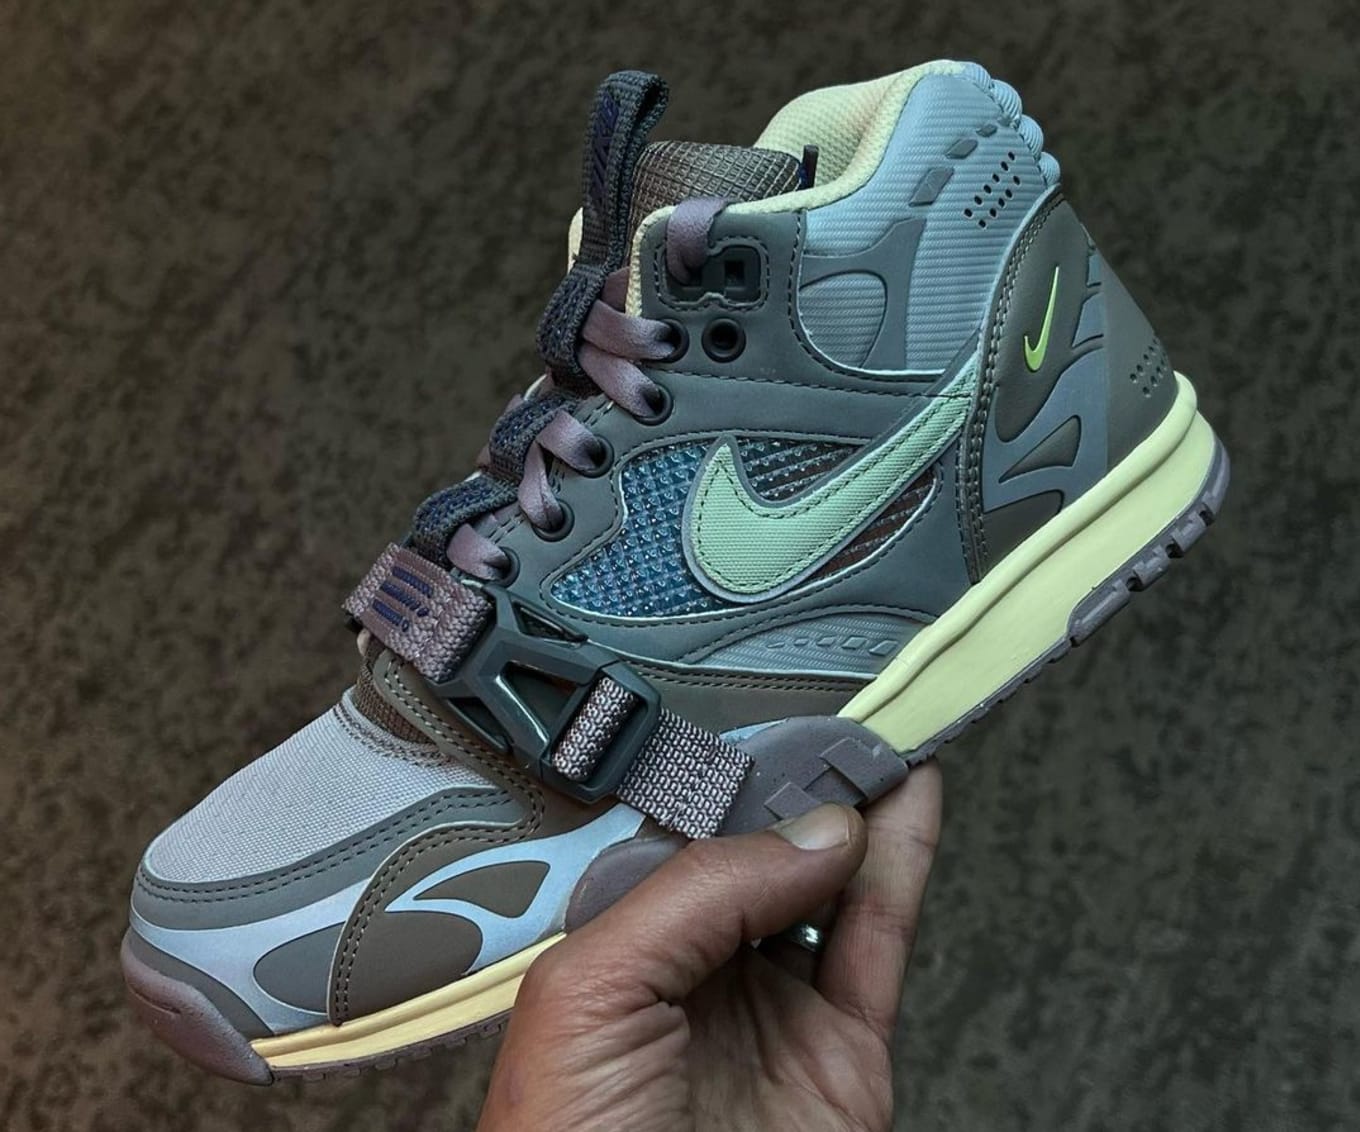 knal eend domein Nike Air Trainer 1 SP Release Date & First Look 2022 | Sole Collector